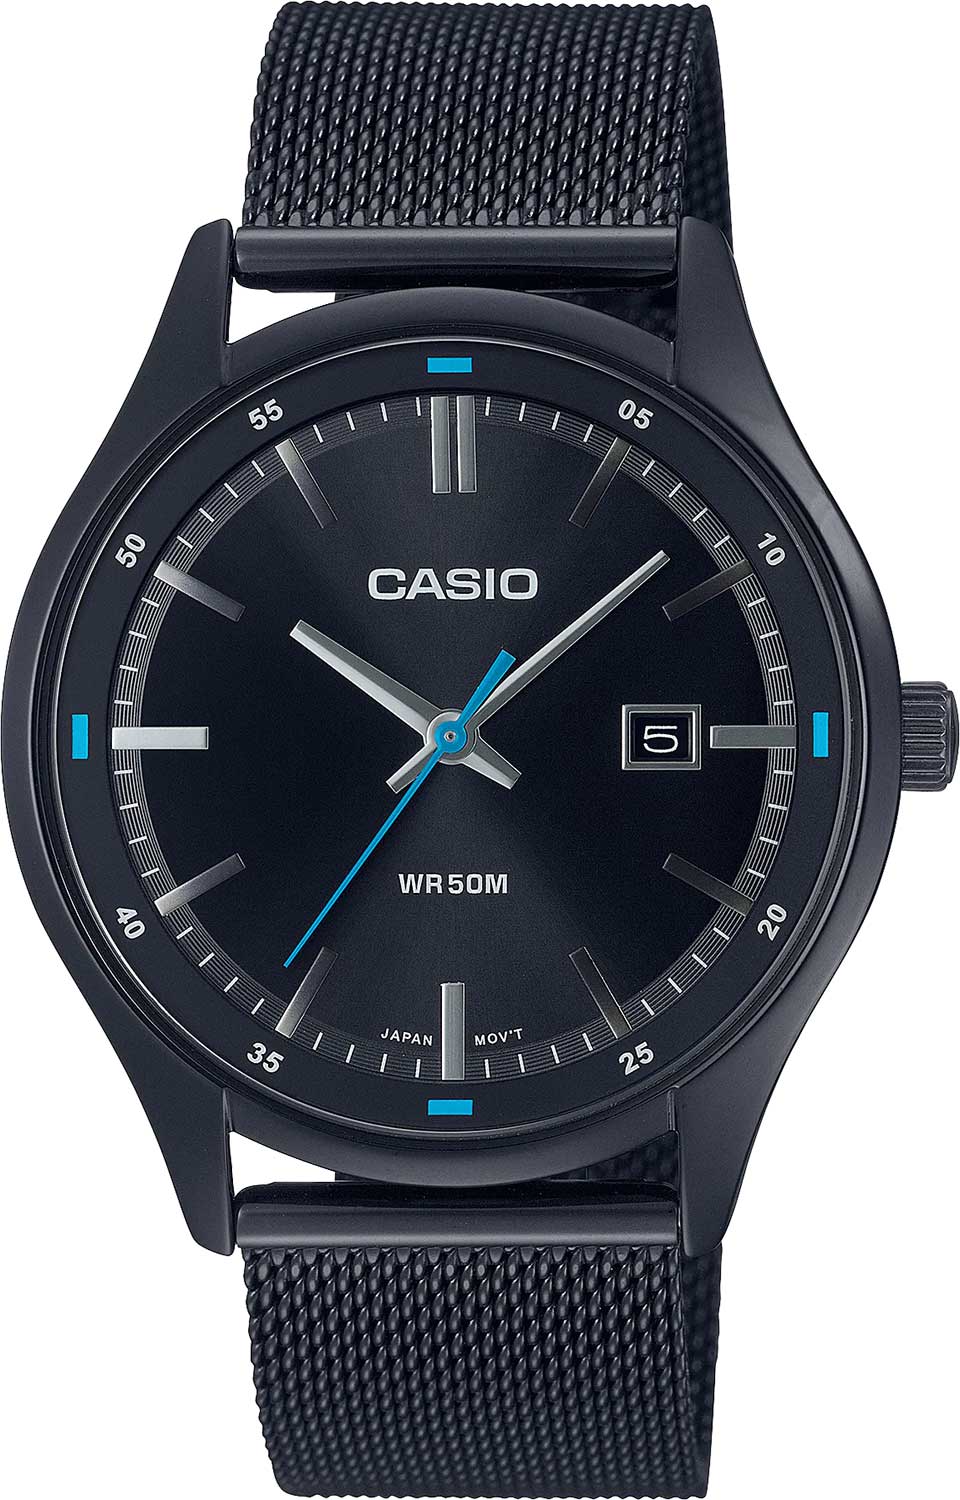    Casio Collection MTP-E710MB-1A